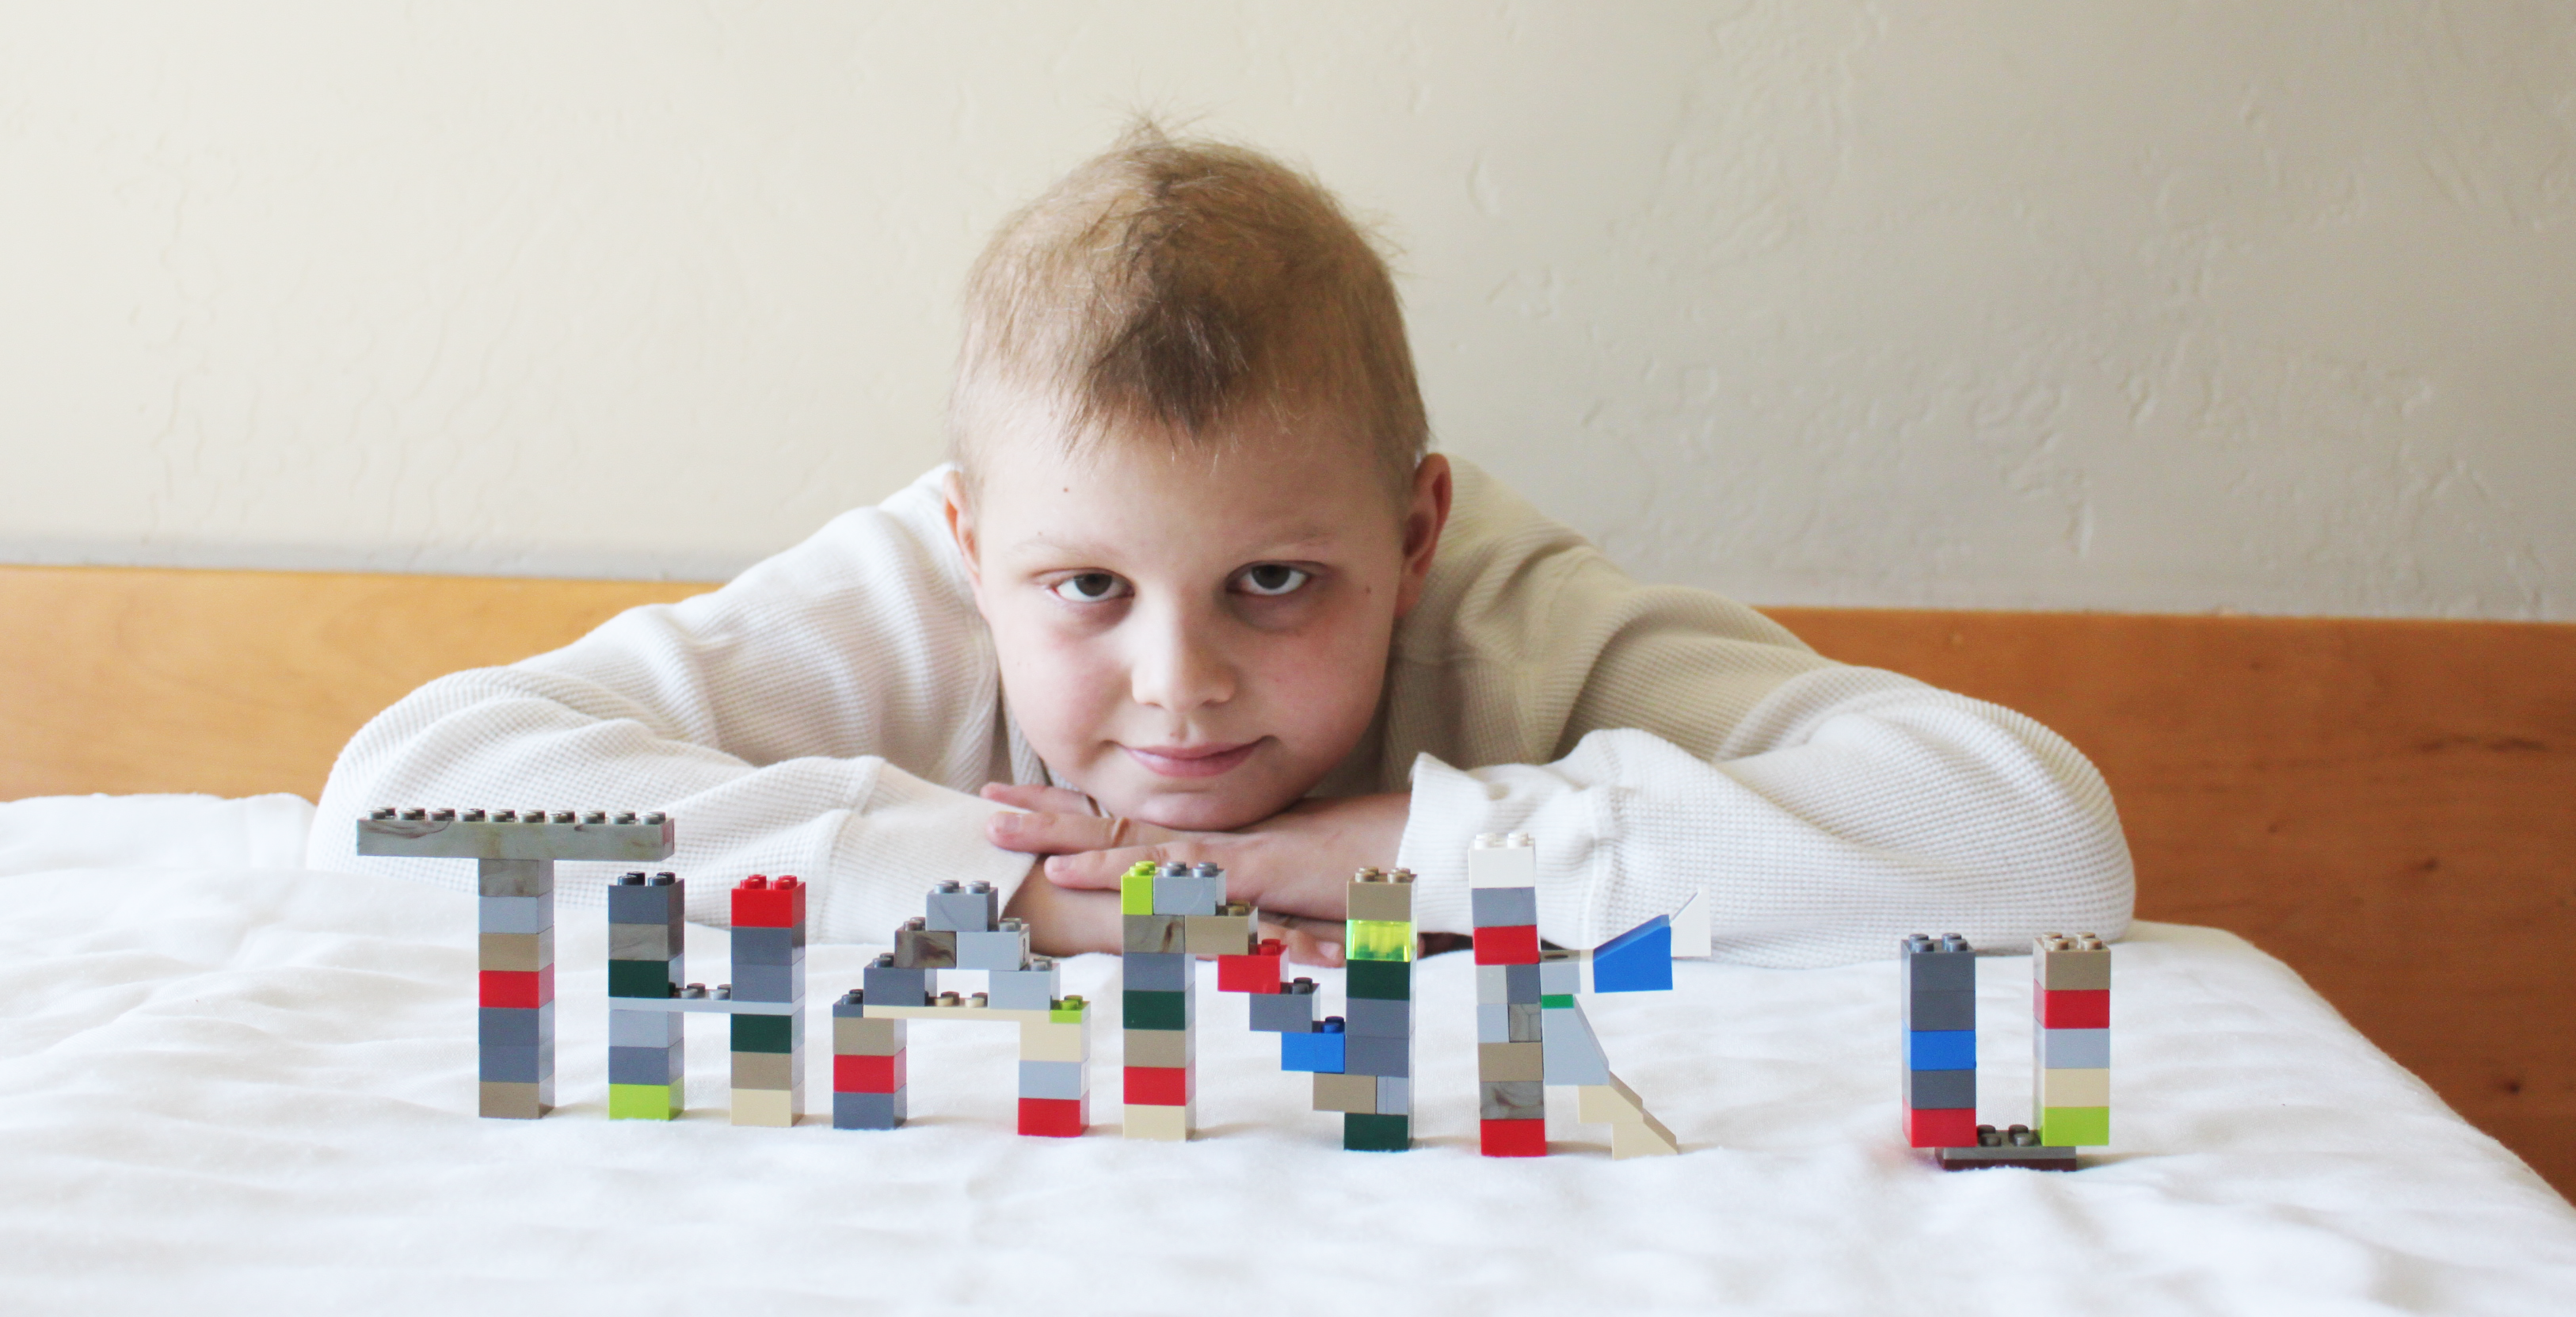 Peyton Armstrong during cancer treatment with, Thank You, written out in front of him in Legos